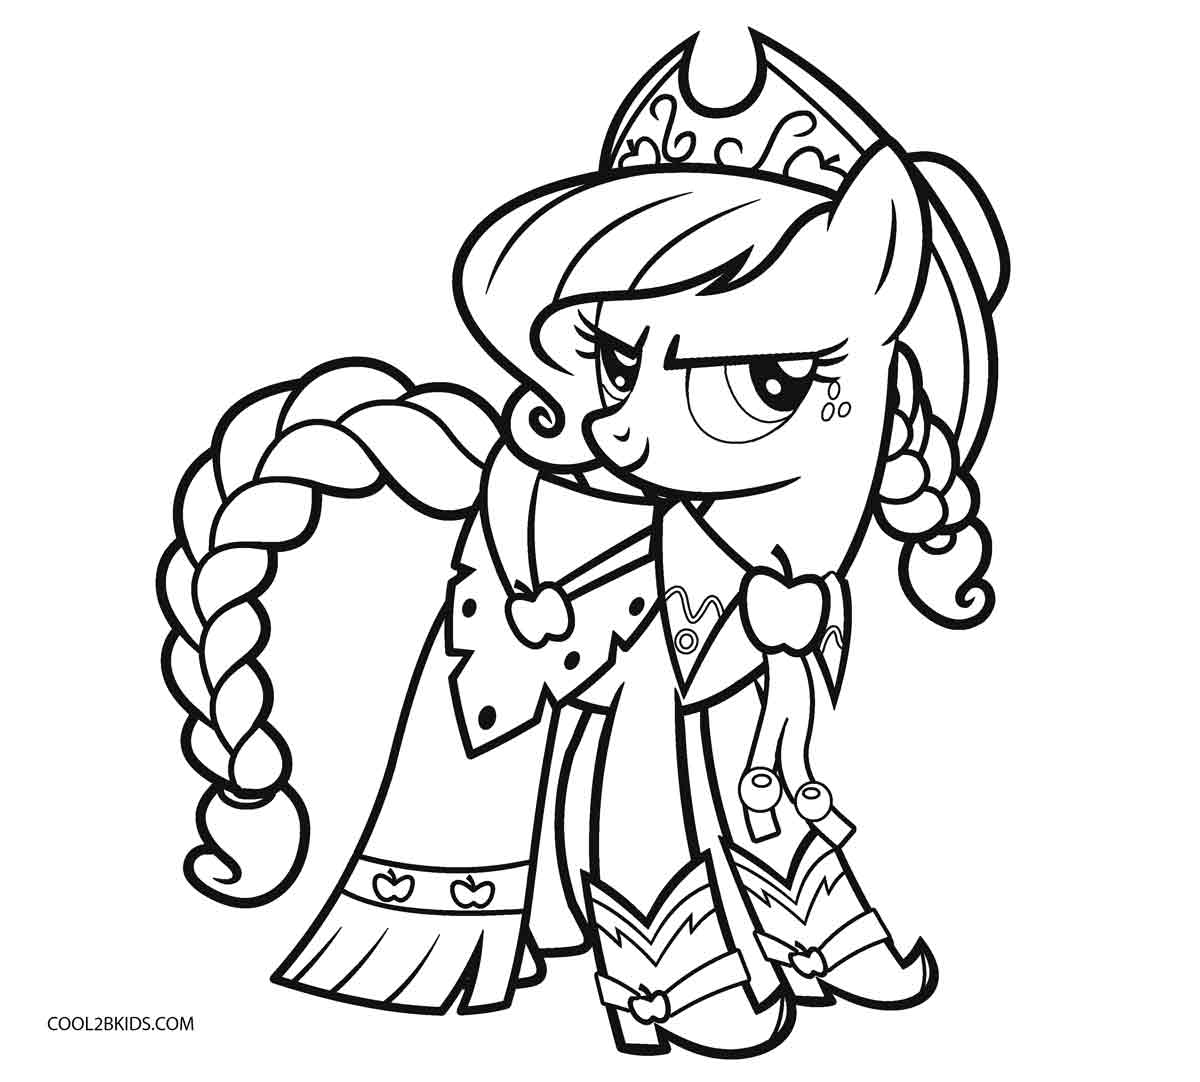 my little pony colouring pages to print my little pony coloring pages coloring pages for kids print pony my little colouring to pages 